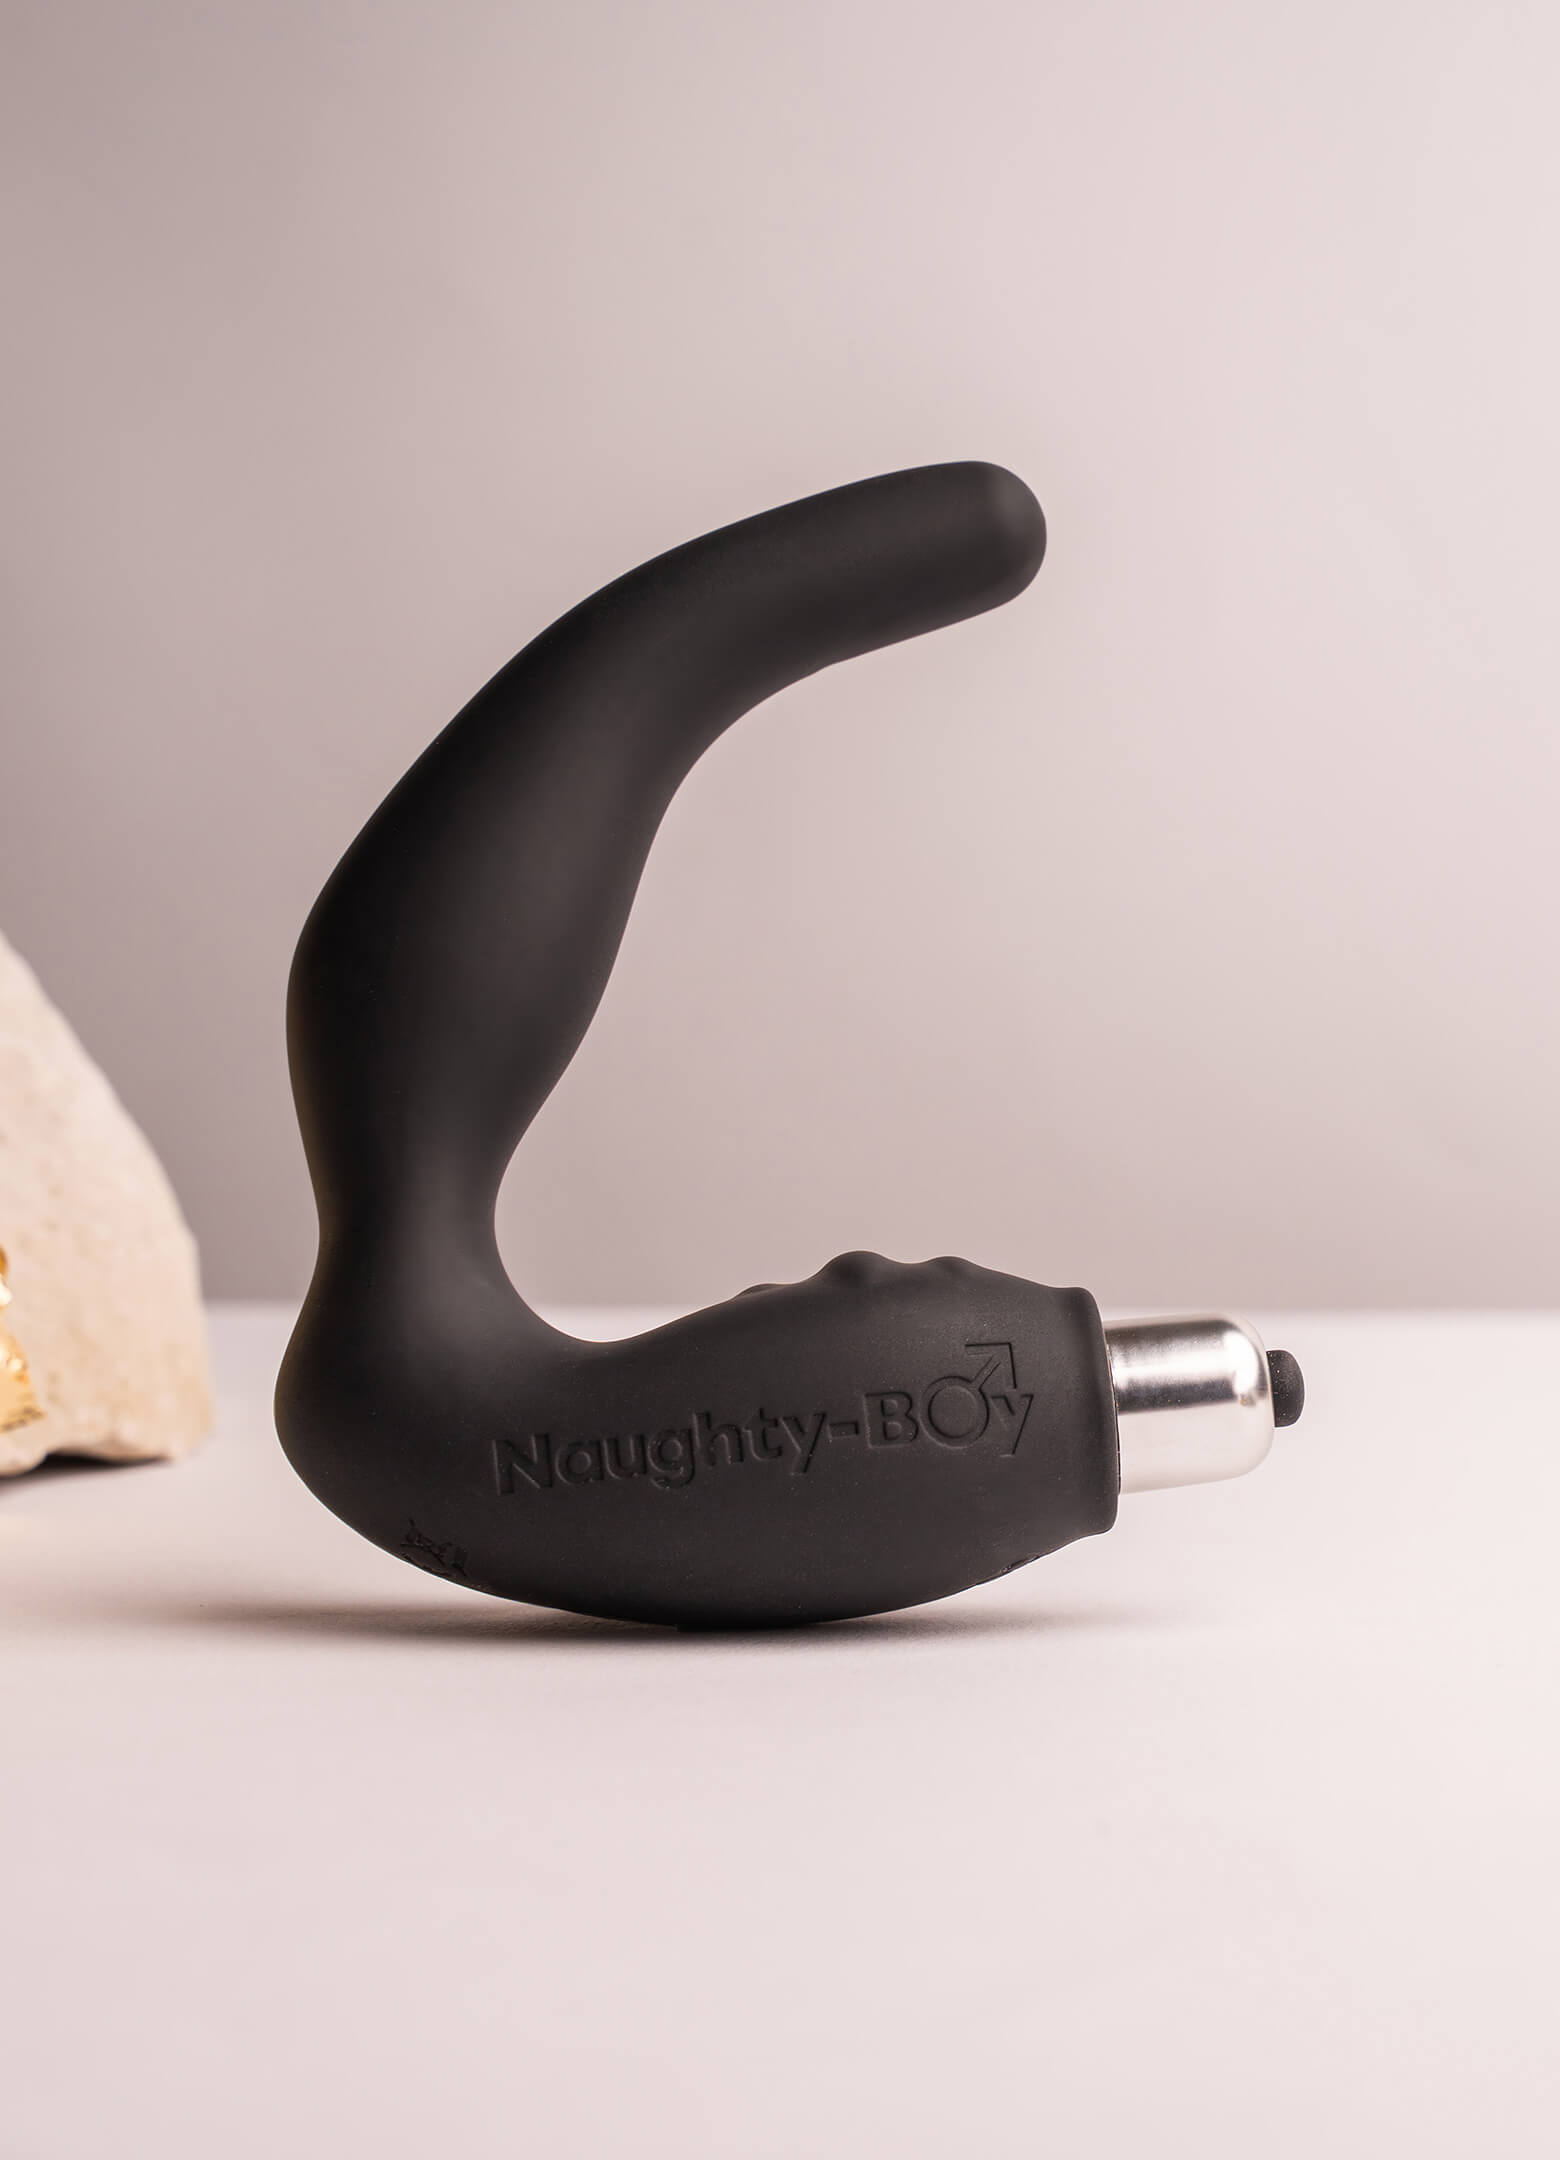 Silicone prostate massager with rippled perineum pleasure points housing a removable bullet vibrator in black.